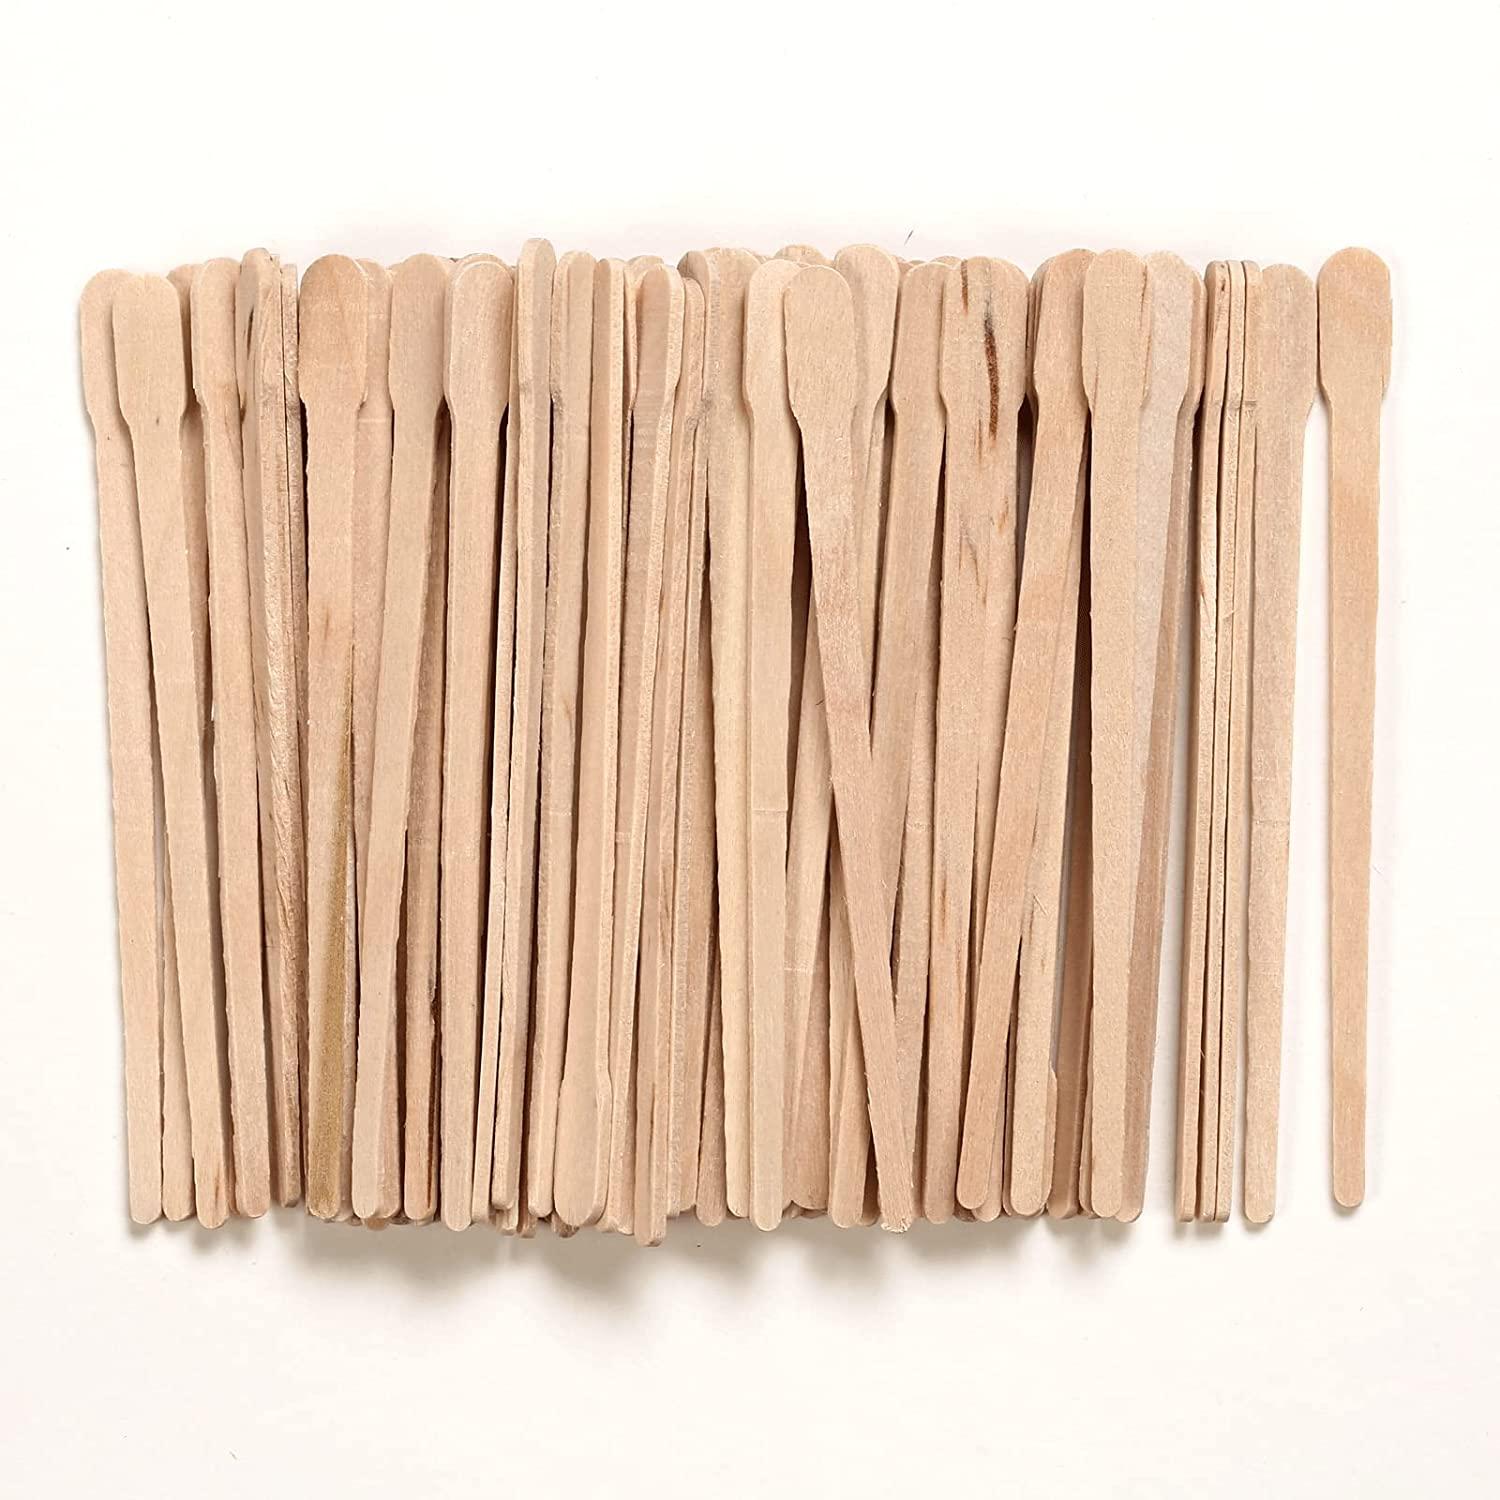 50pcs Wooden Wax Sticks - For Body Legs Face And Small Medium Large Sizes  Eyebrow Waxing Applicator Spatulas For Hair Removal Or Wood Craft Sticks